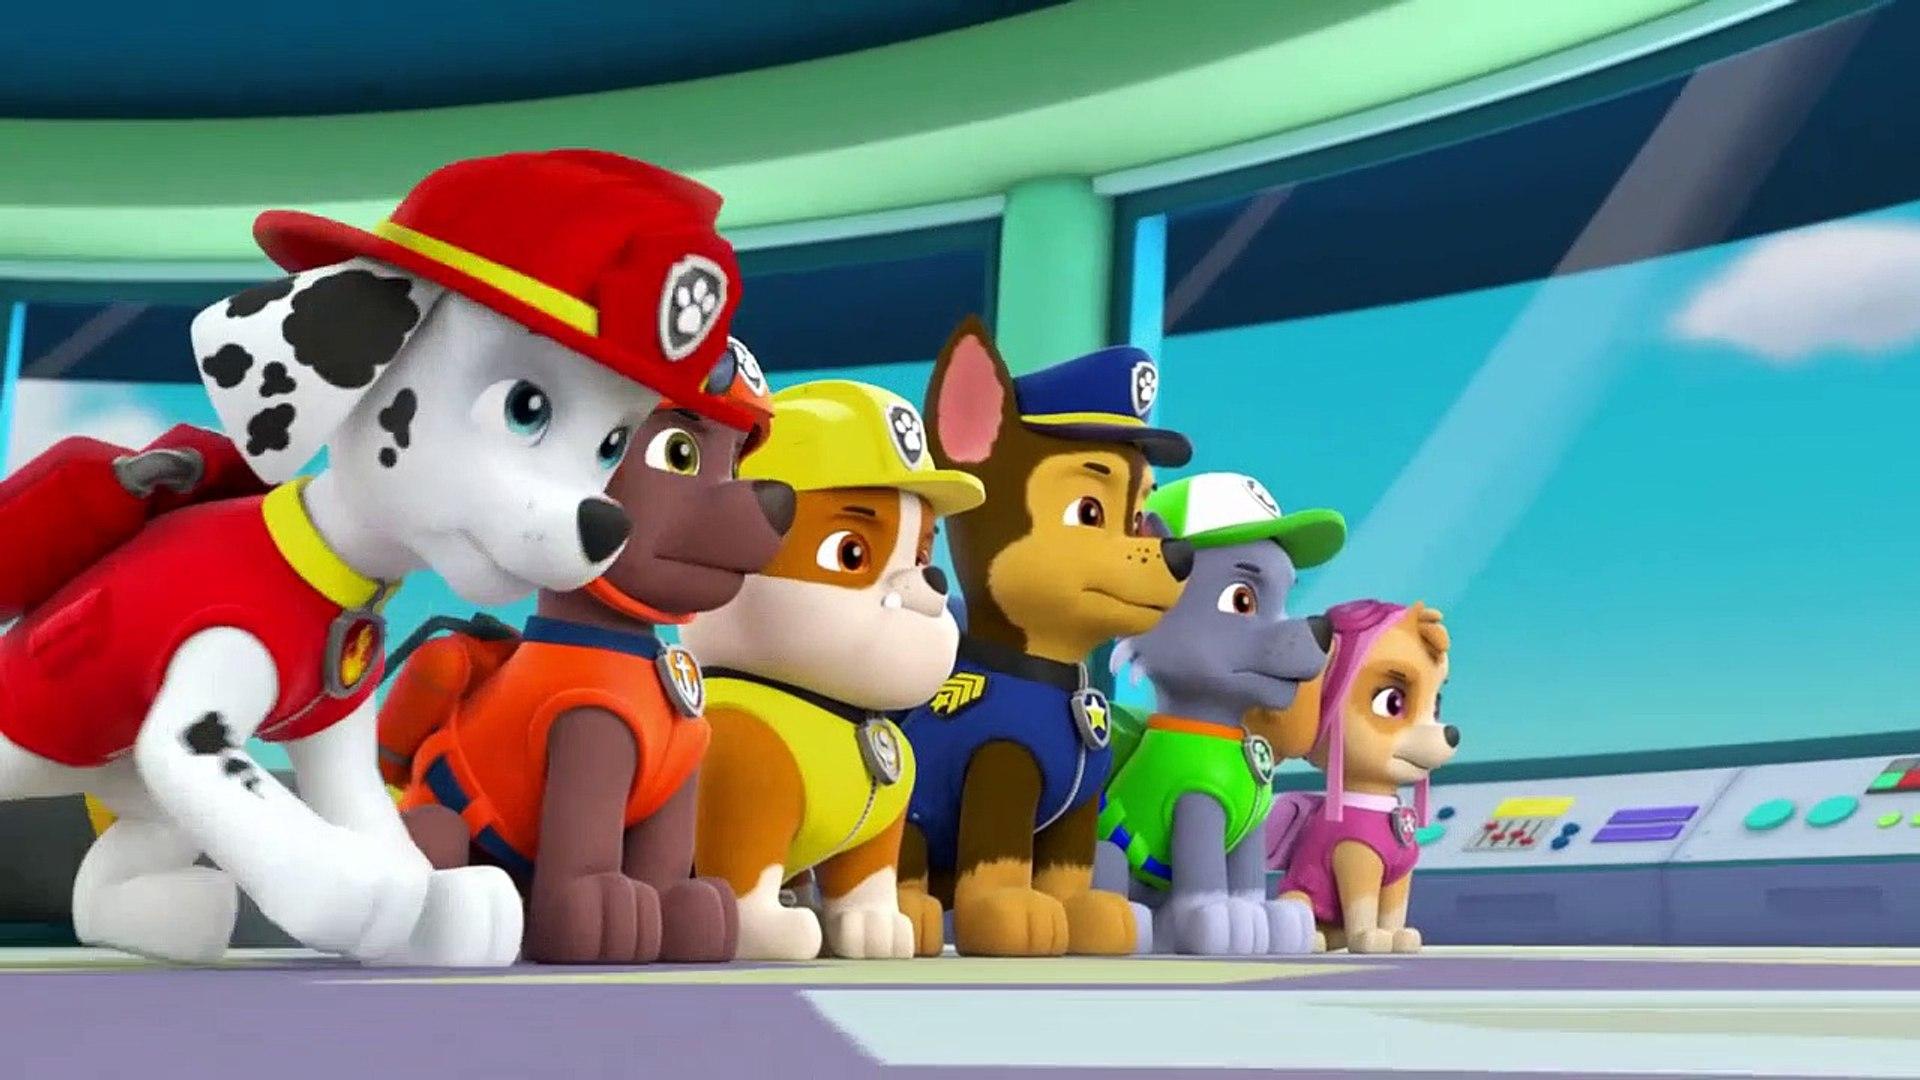 Abby Hatcher + PAW Patrol Team Up for the Rescue! 